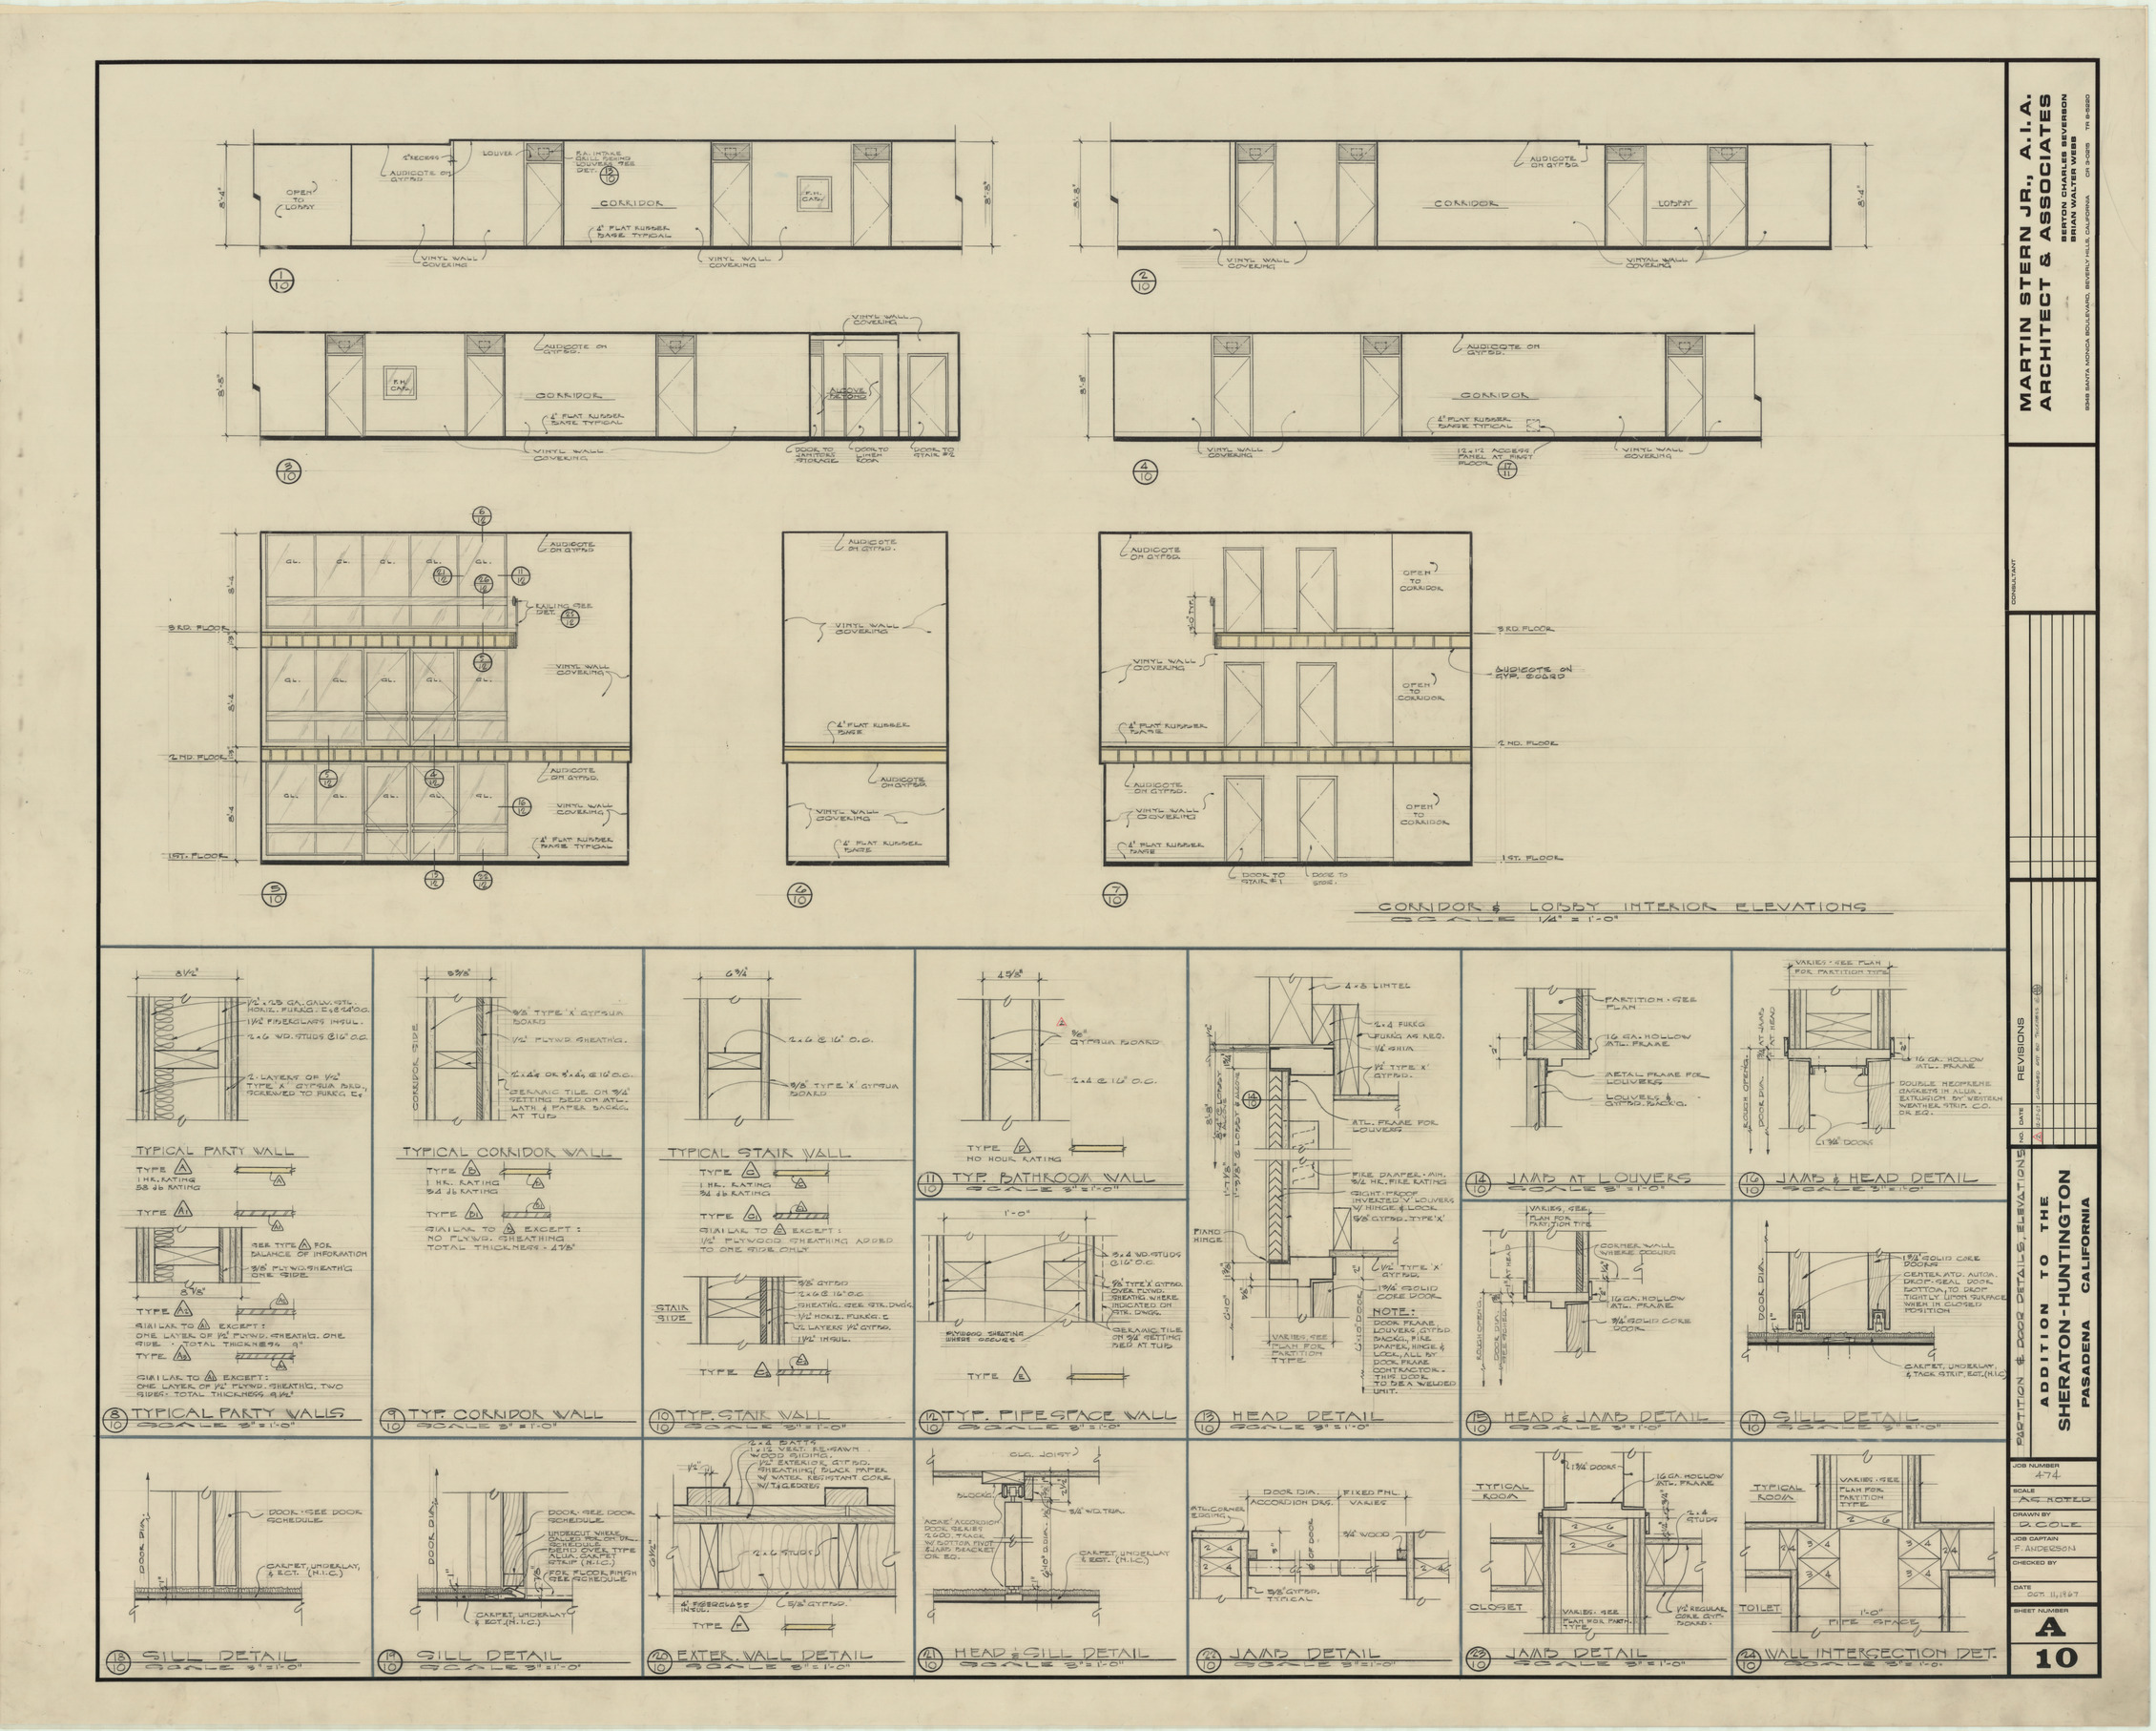 Huntington addition, architectural, electrical, mechanical, and plumbing: architectural drawings, image 011